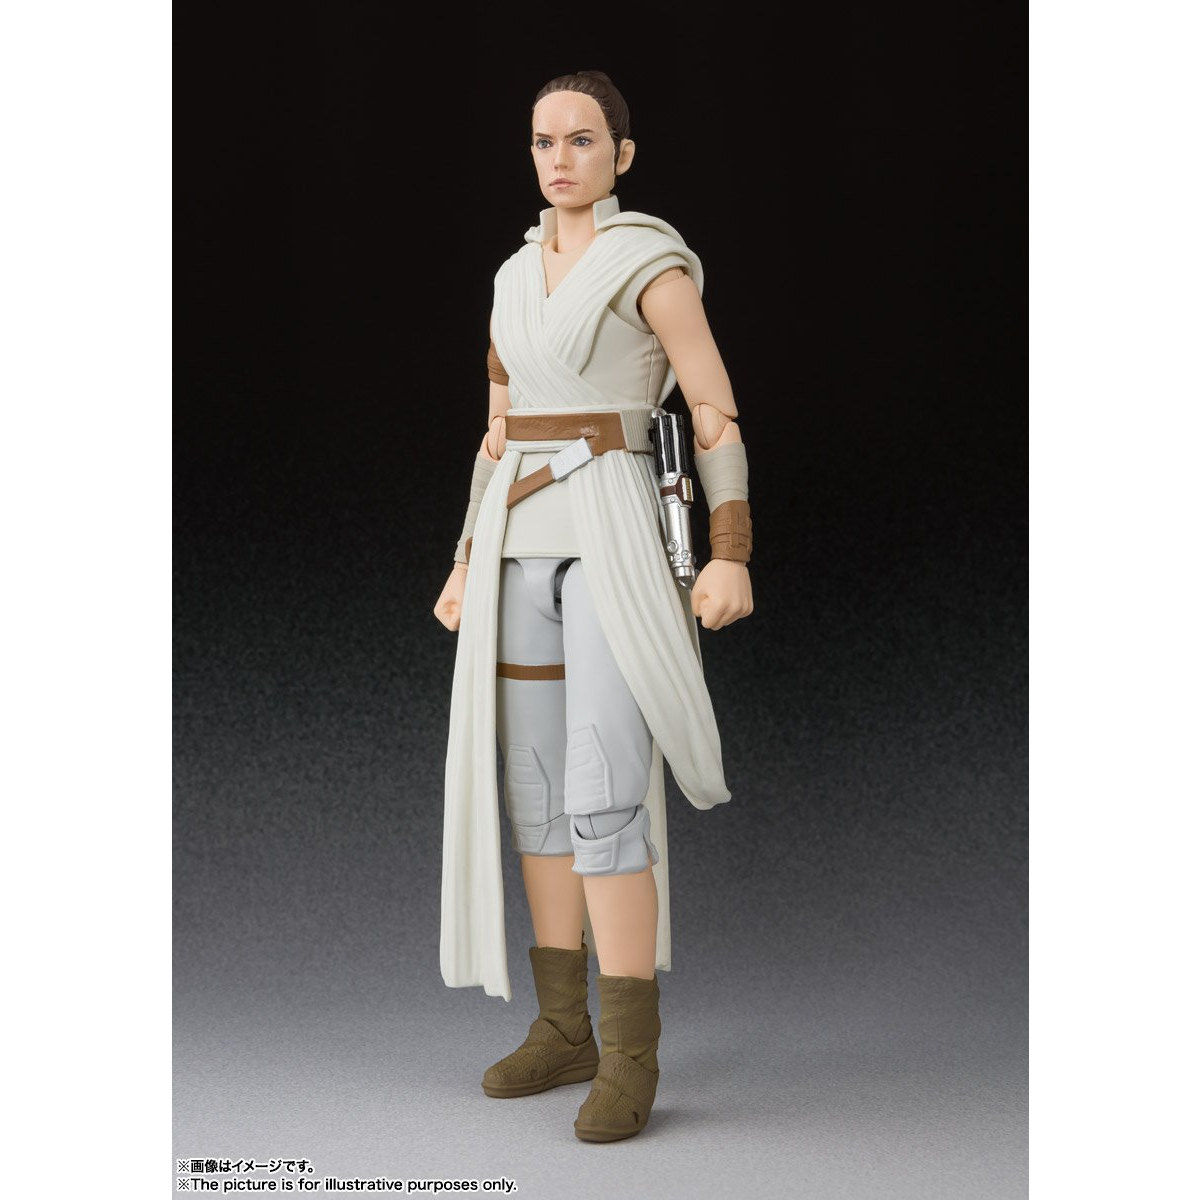 Simple style & Heroic action Figuarts Rey Palpatine + D-O Droid(Star Wars Episode Ⅸ : The Rise of Skywalker)